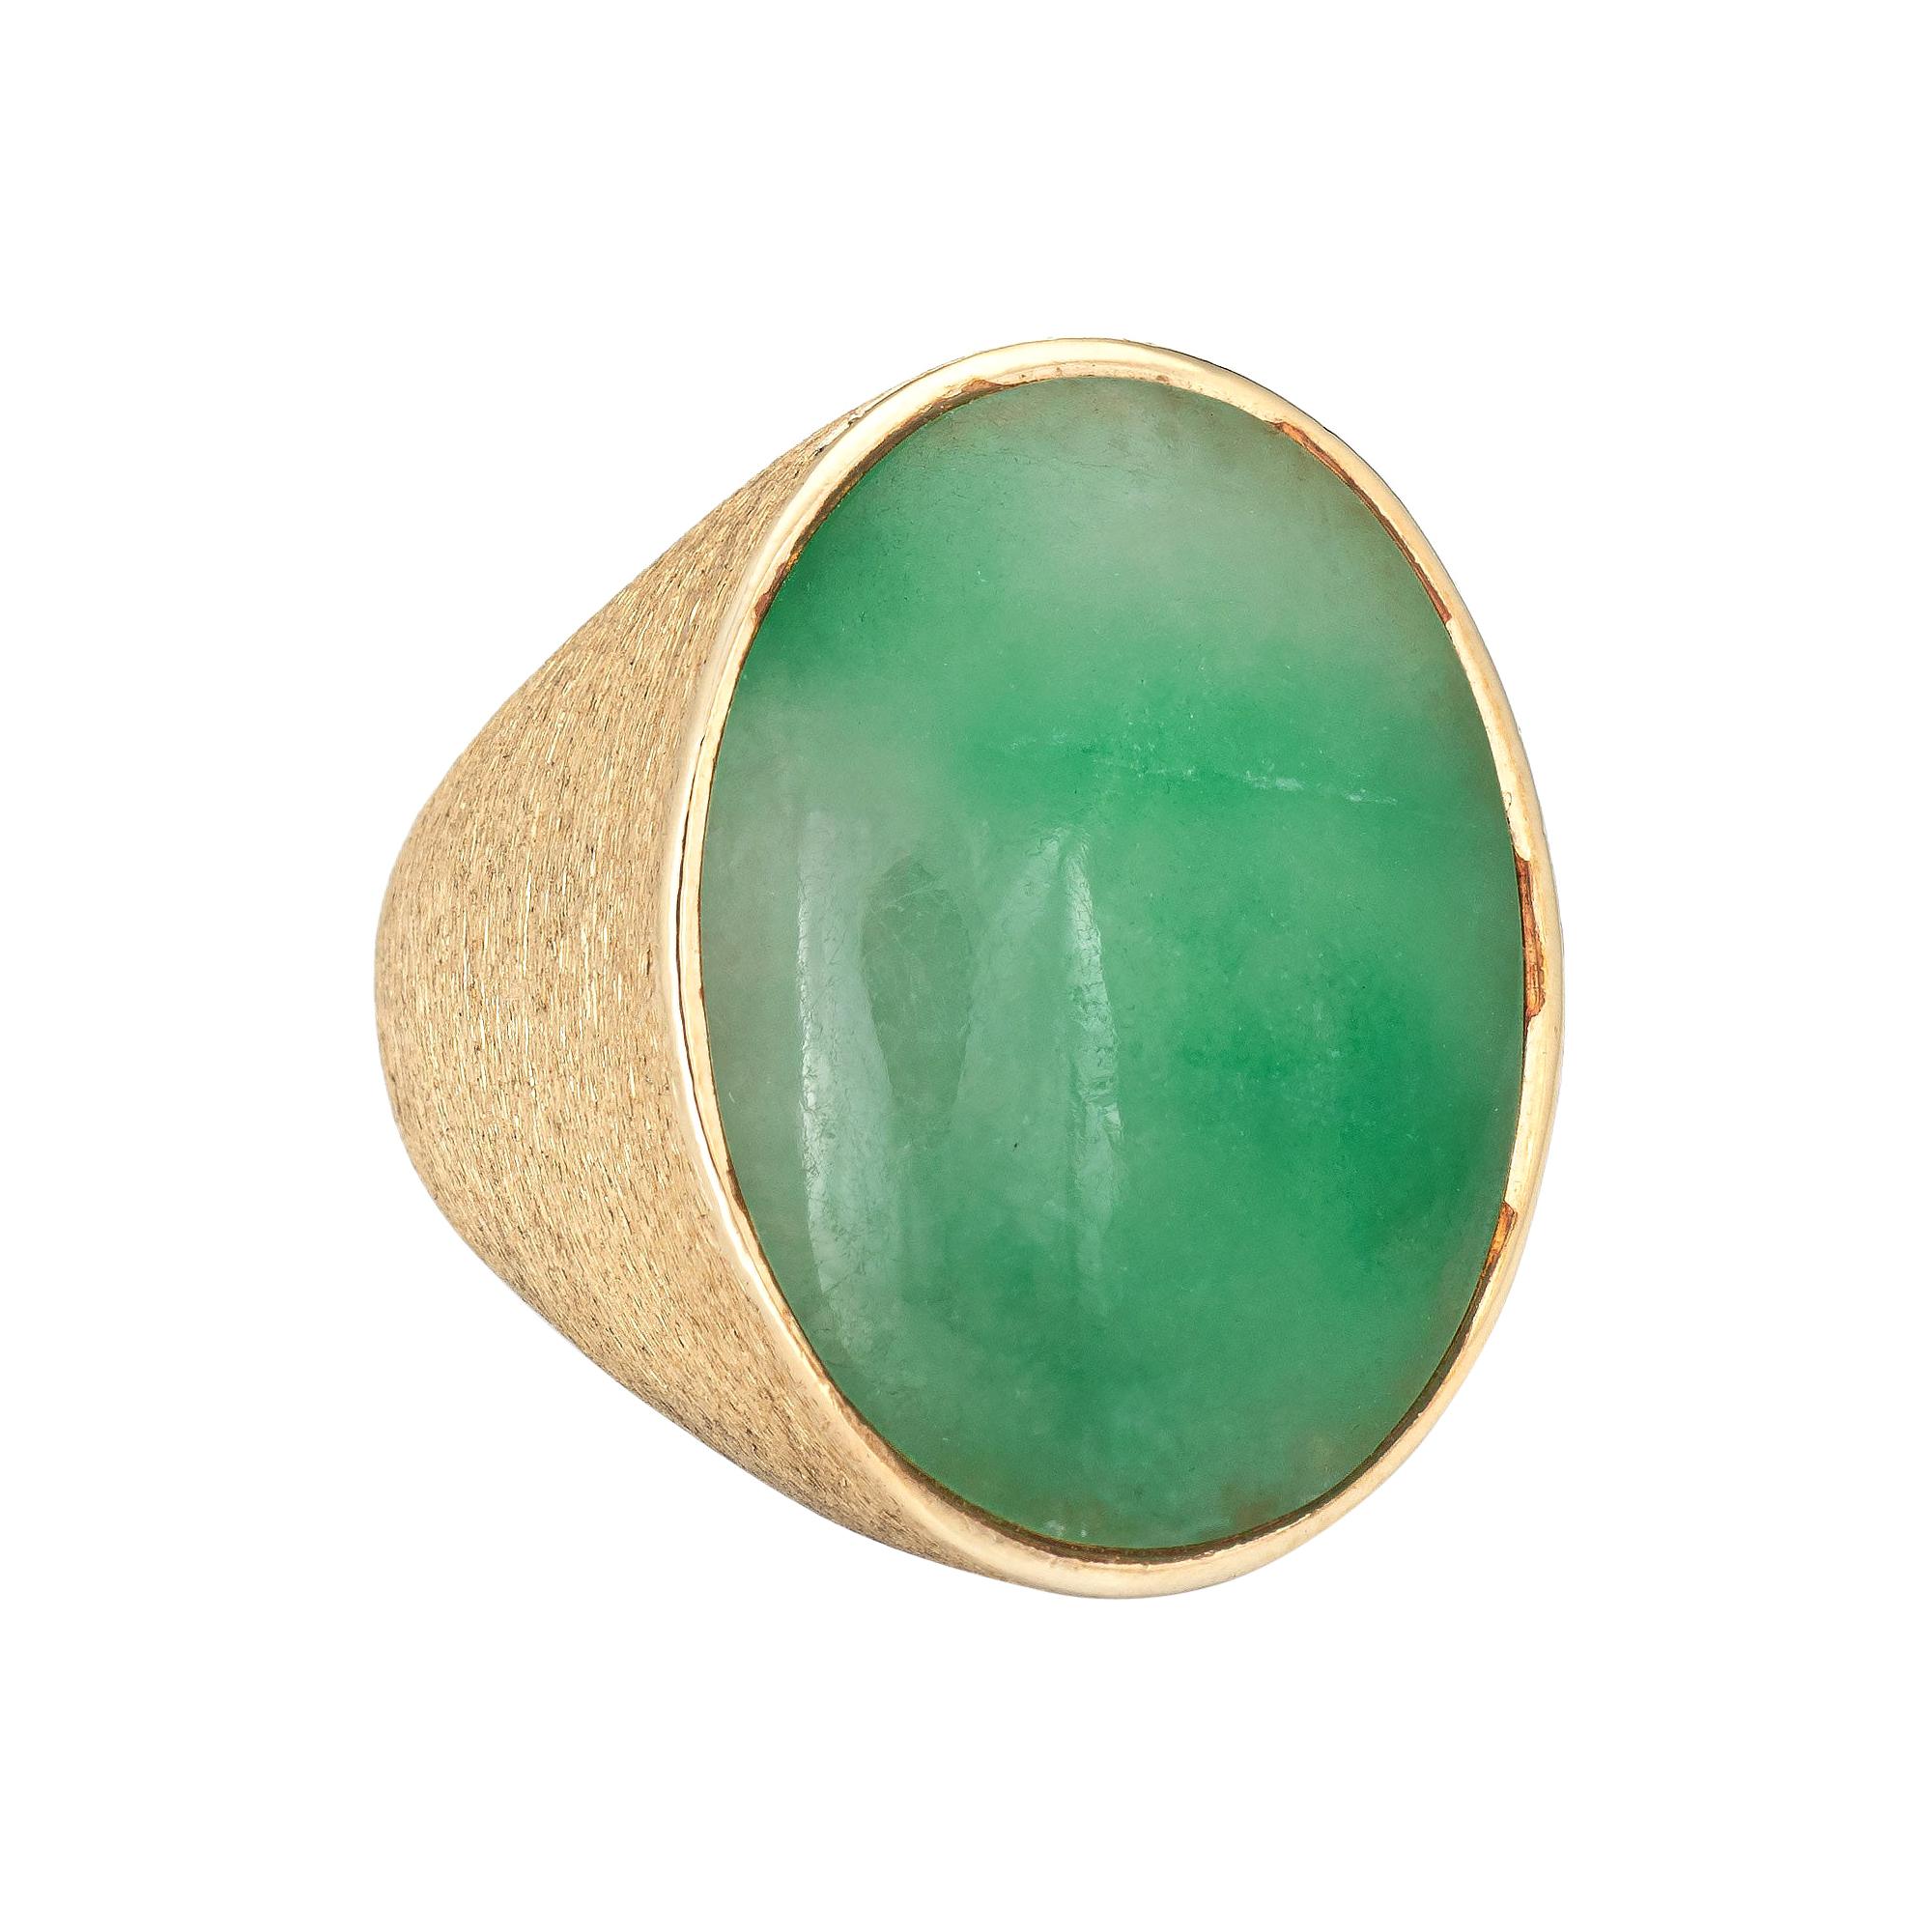 Large Jade Ring Vintage 14k Yellow Gold Oval Signet Men's Jewelry Gypsy